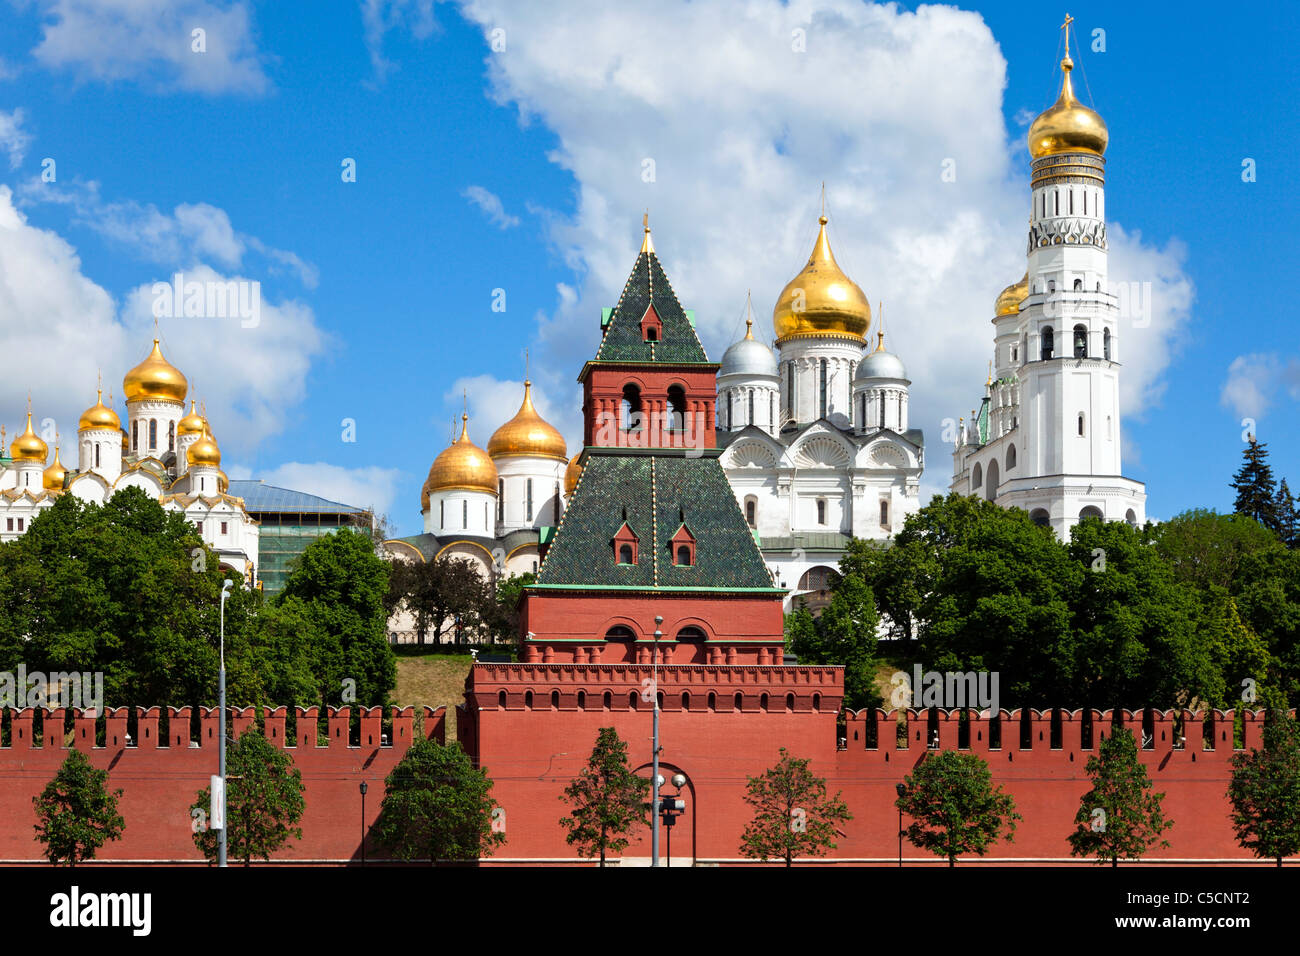 The cathedrals Moscow Kremlin: Assumption, Archangel, Annunciation and the bell tower of Ivan the Great. Russia. Stock Photo